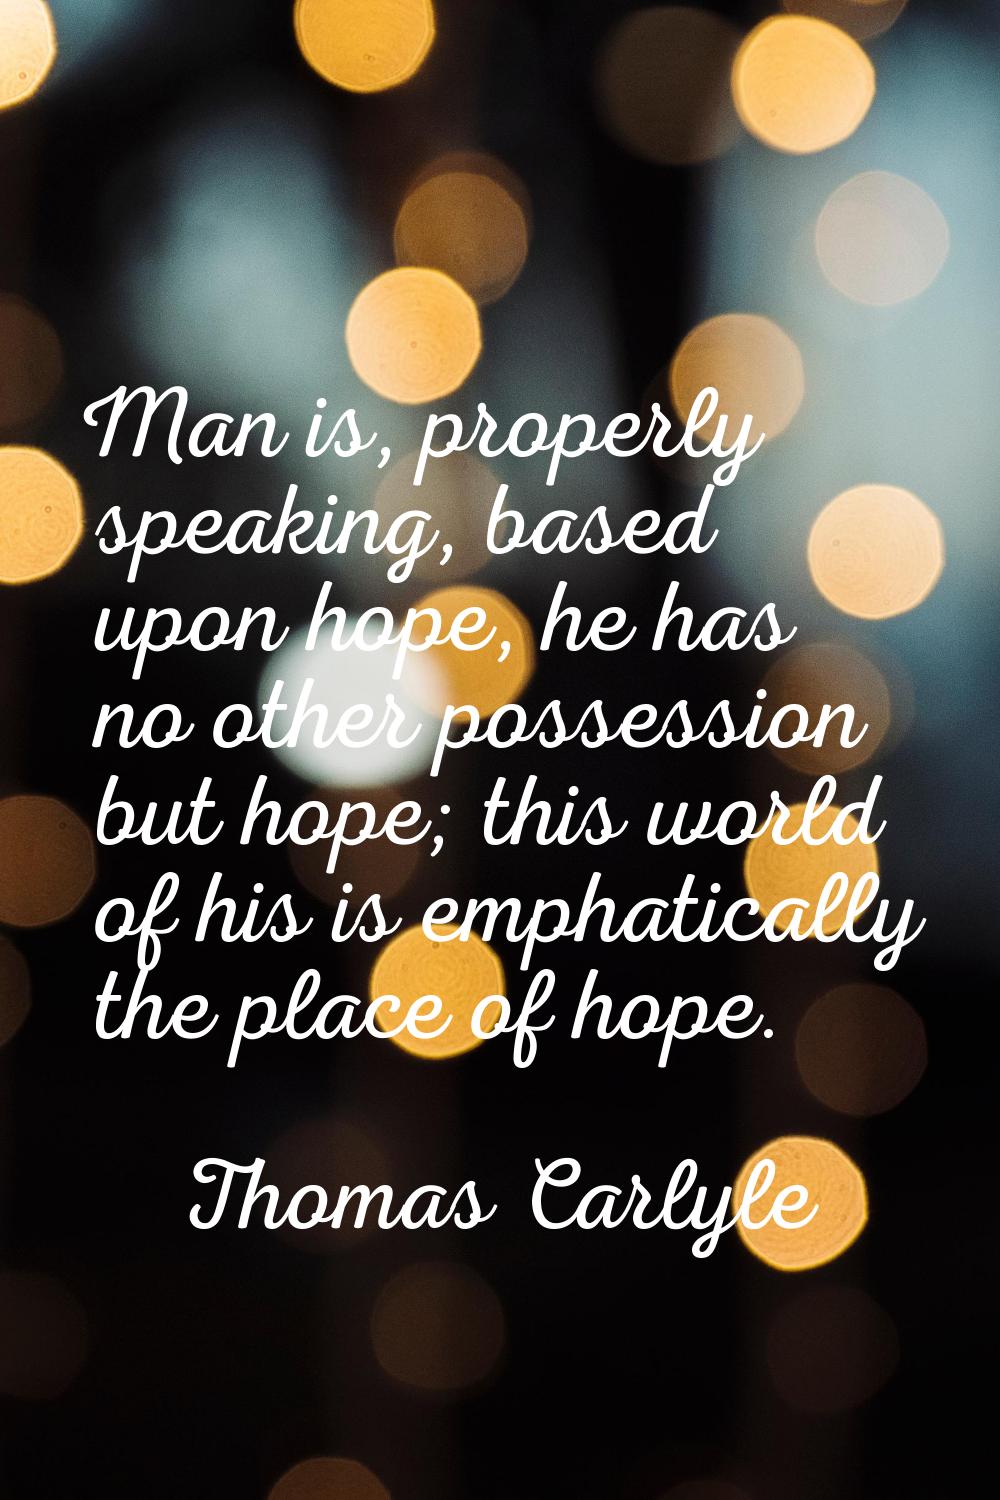 Man is, properly speaking, based upon hope, he has no other possession but hope; this world of his 